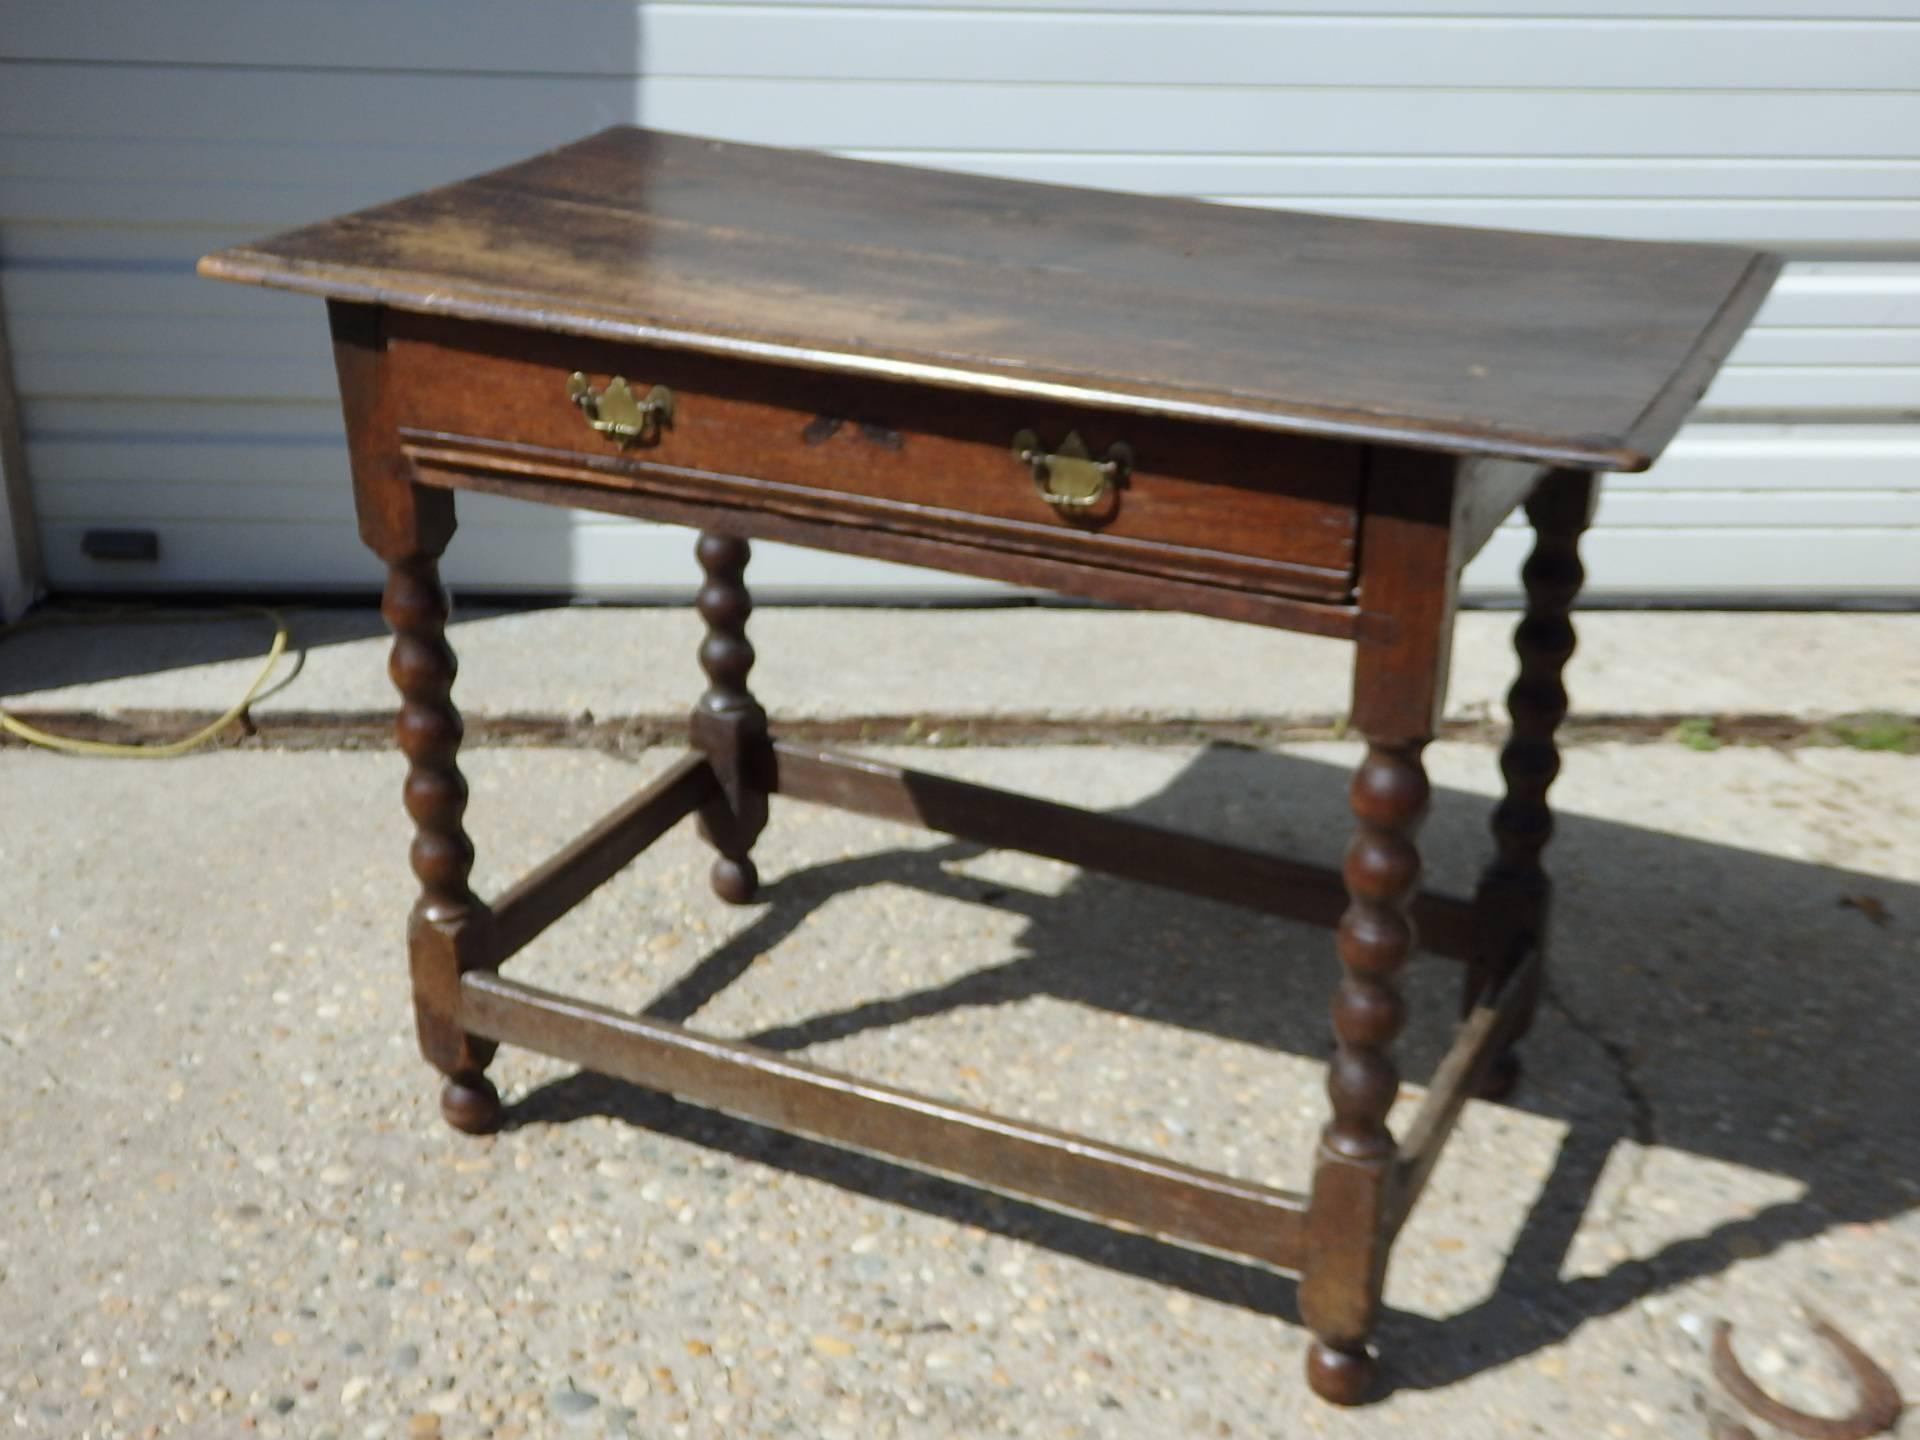 19th century English oak side table with bobbin style legs, stretcher base and original brass hardware. Some movement in the top, which is consistent with age and use.